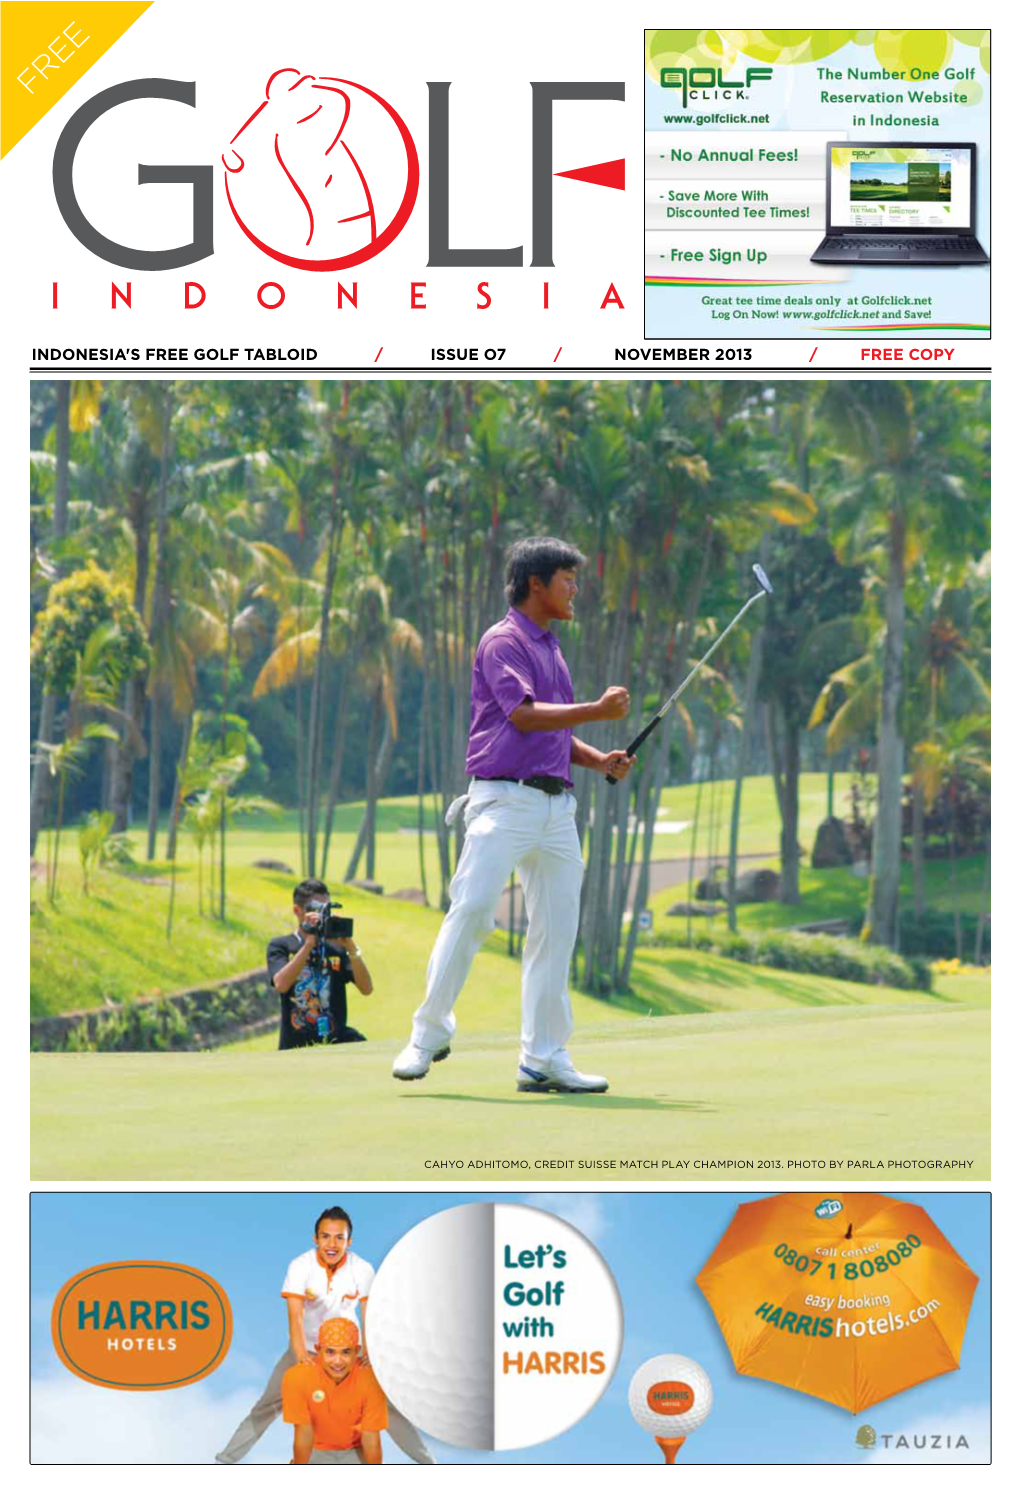 Indonesia's Free Golf Tabloid / Issue O7 / November 2013 / Free Copy